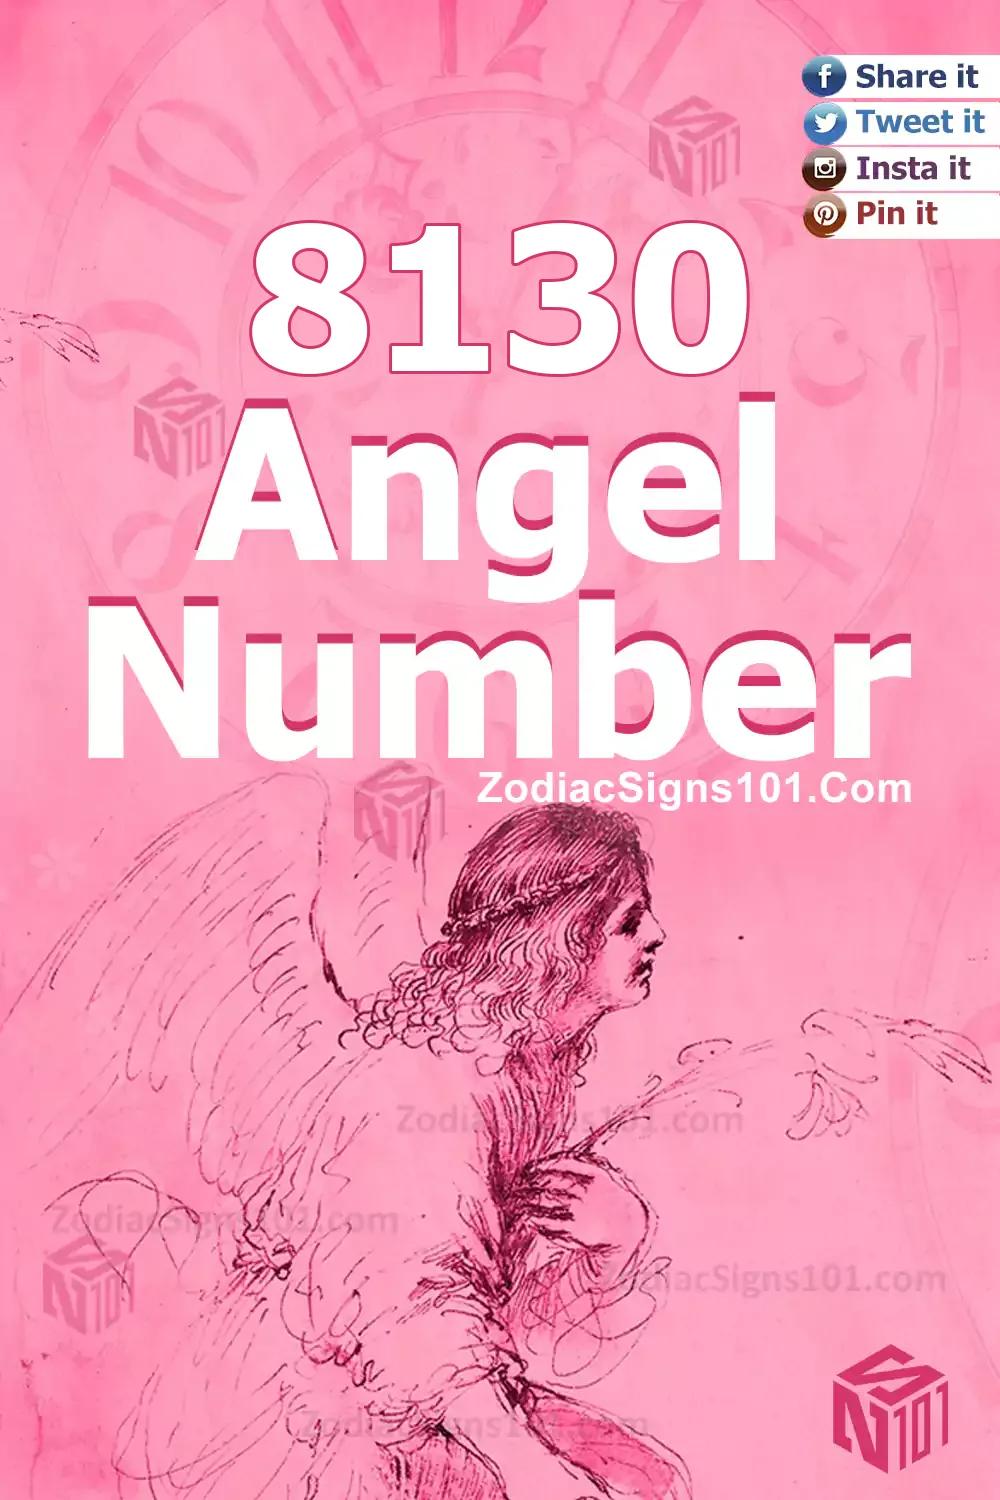 8130 Angel Number Meaning